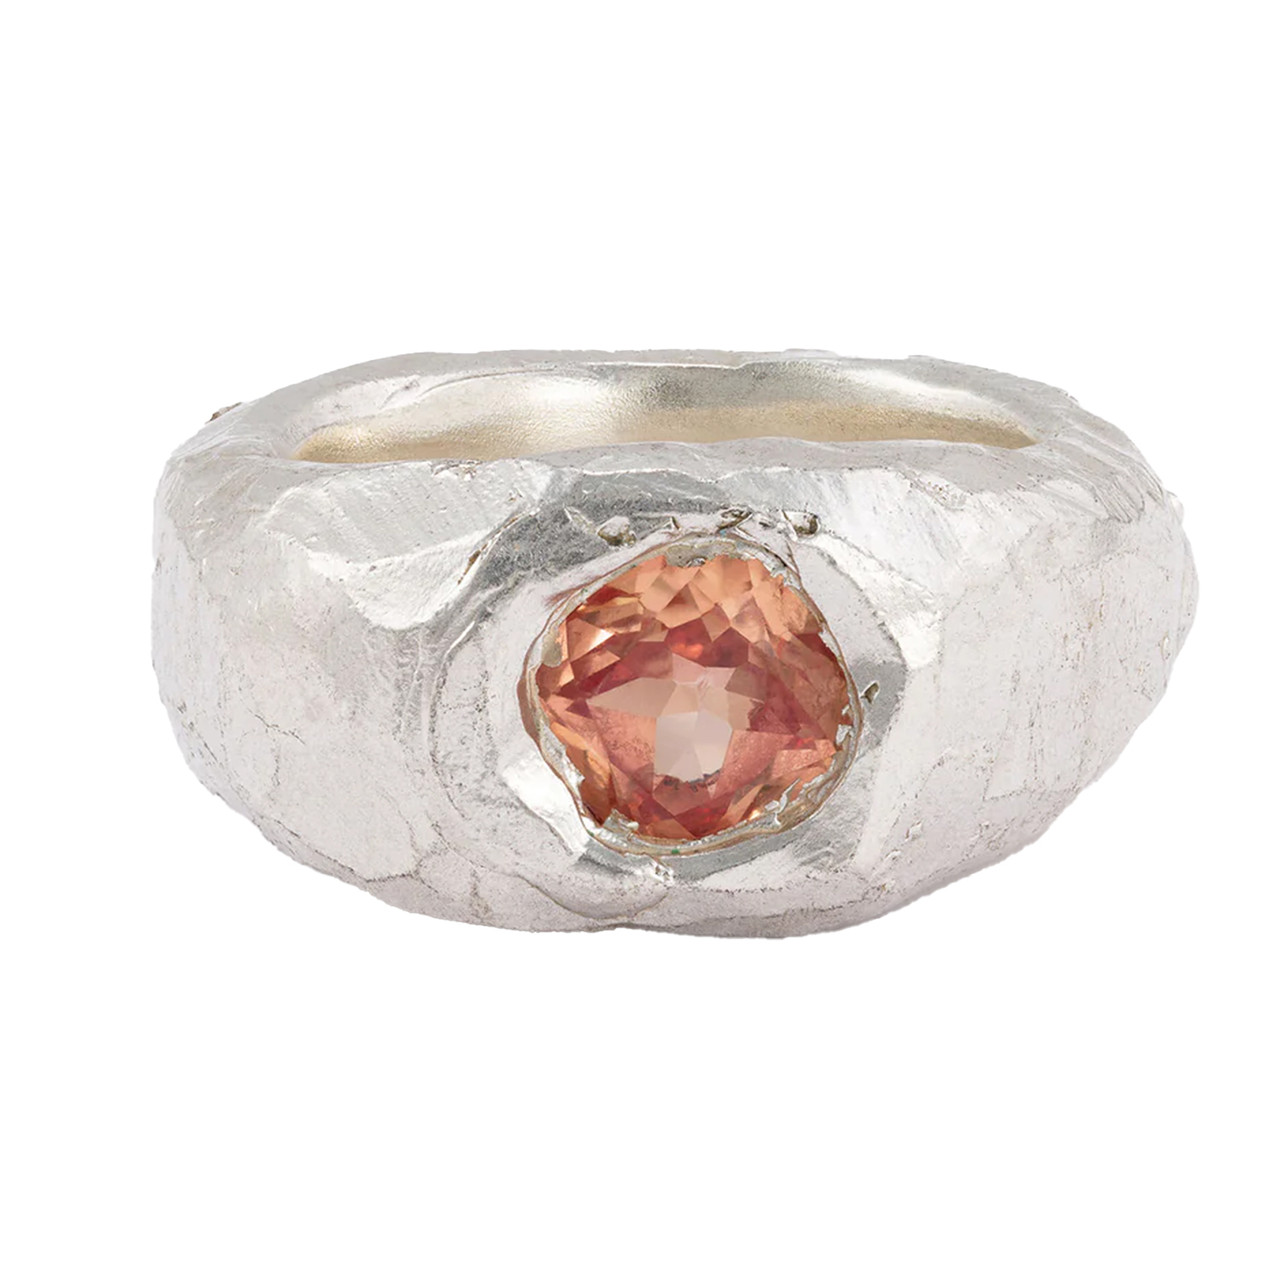 Caburn Padparadscha Sapphire Signet Ring, The Ouze, Tomfoolery London